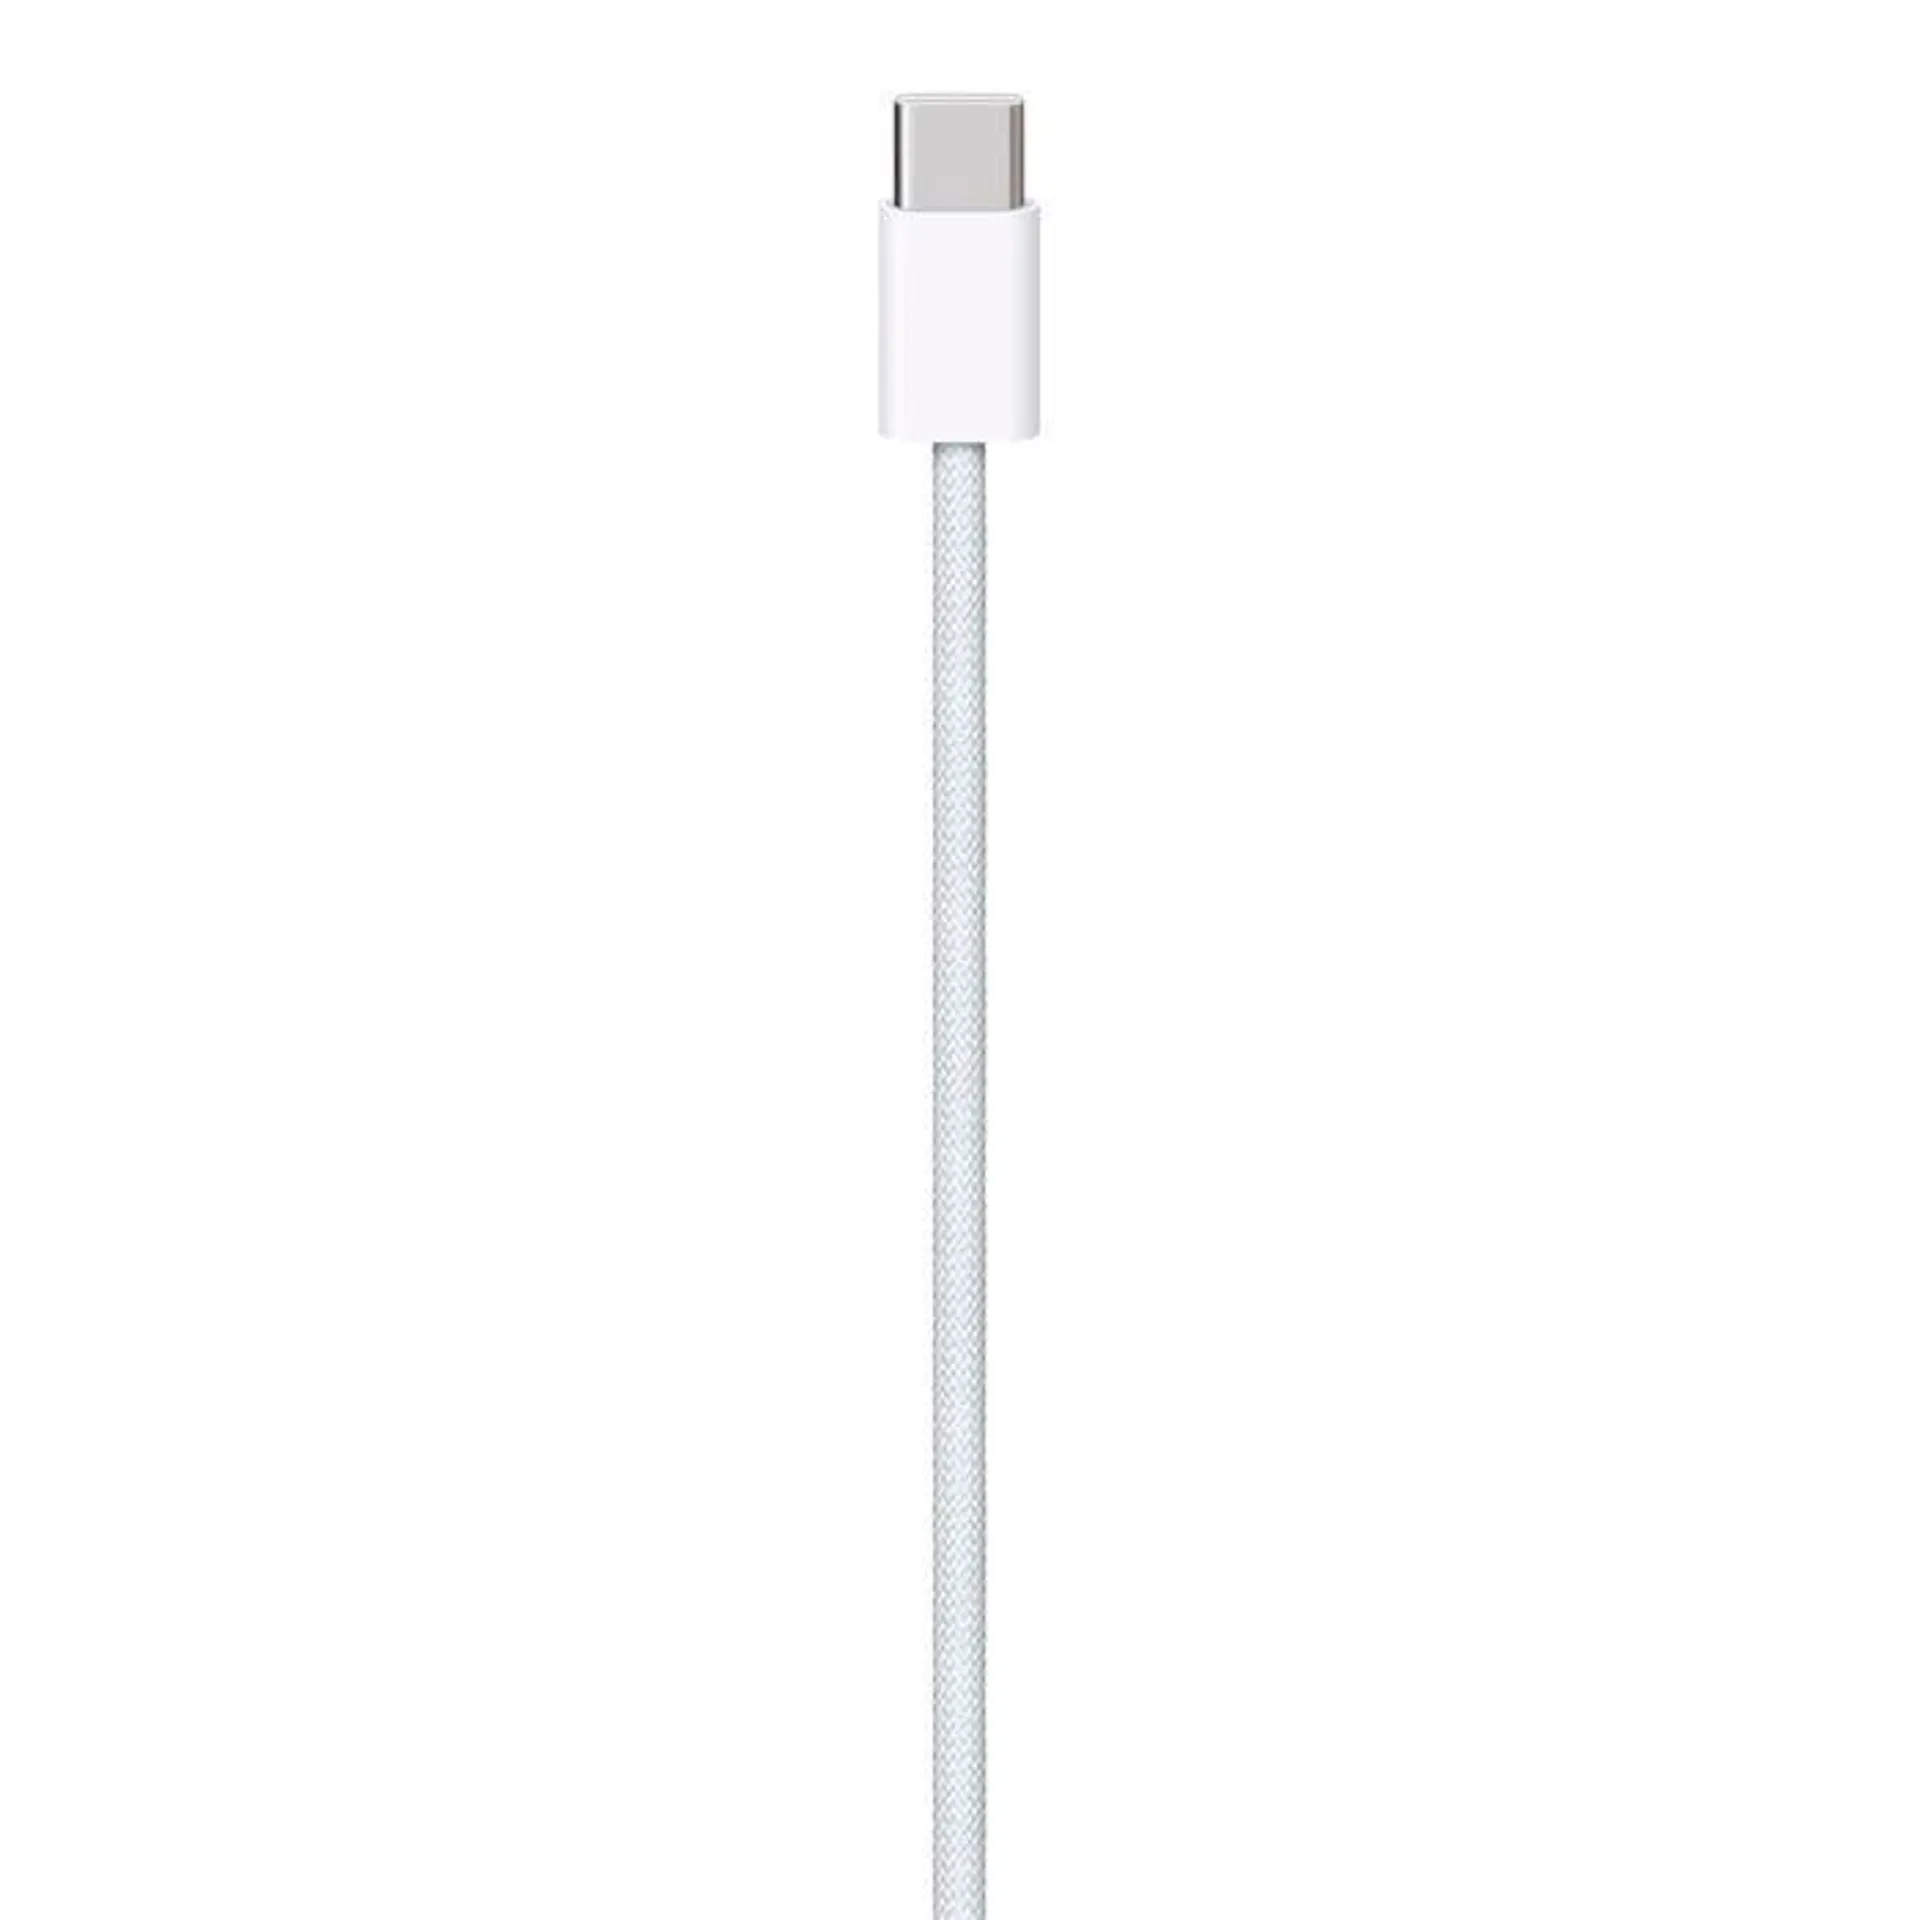 Apple USB-C to USB-C Woven 1m Charge Cable